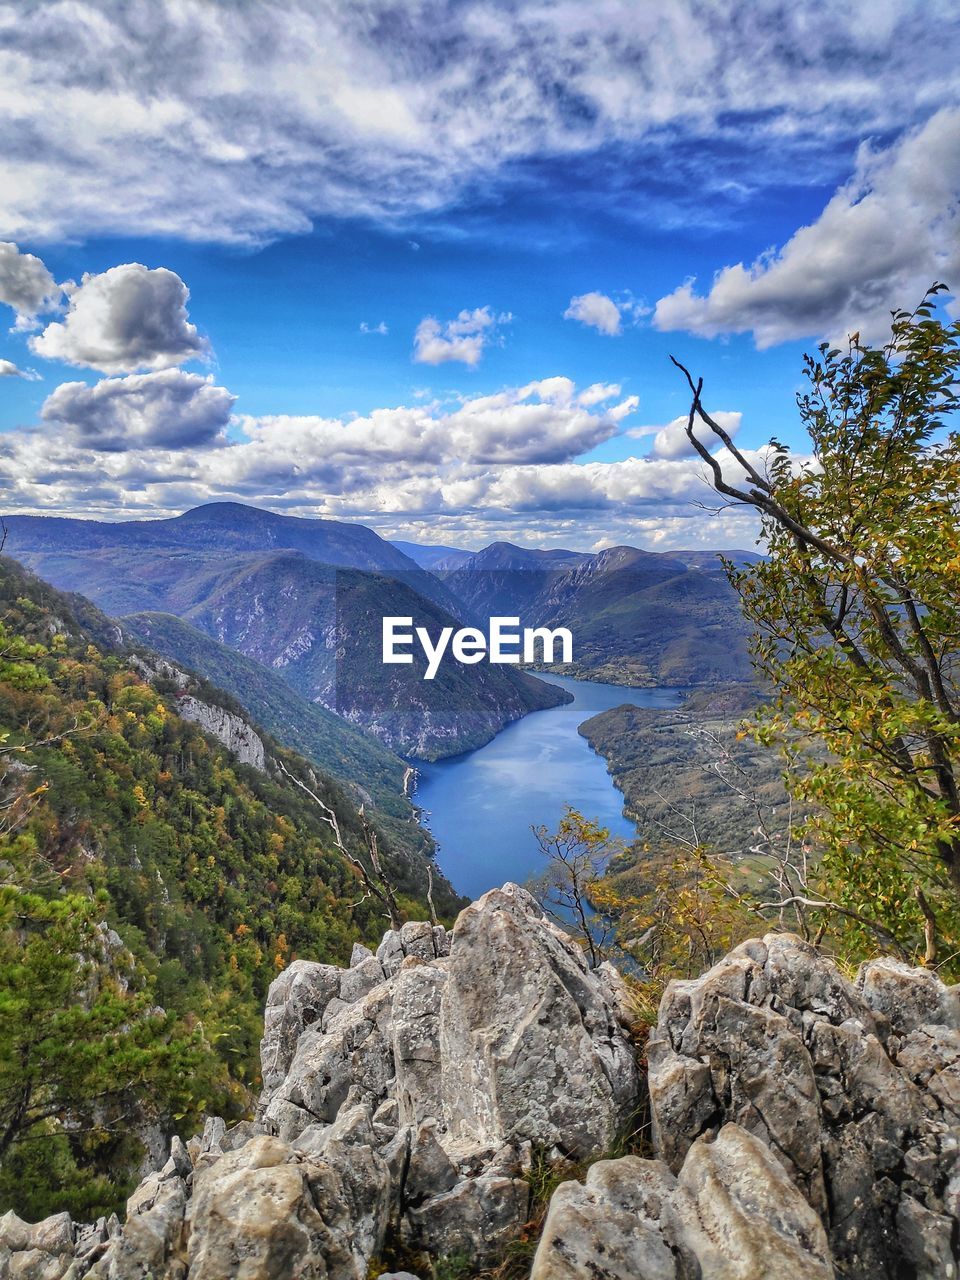 SCENIC VIEW OF MOUNTAINS AND ROCKS AGAINST SKY